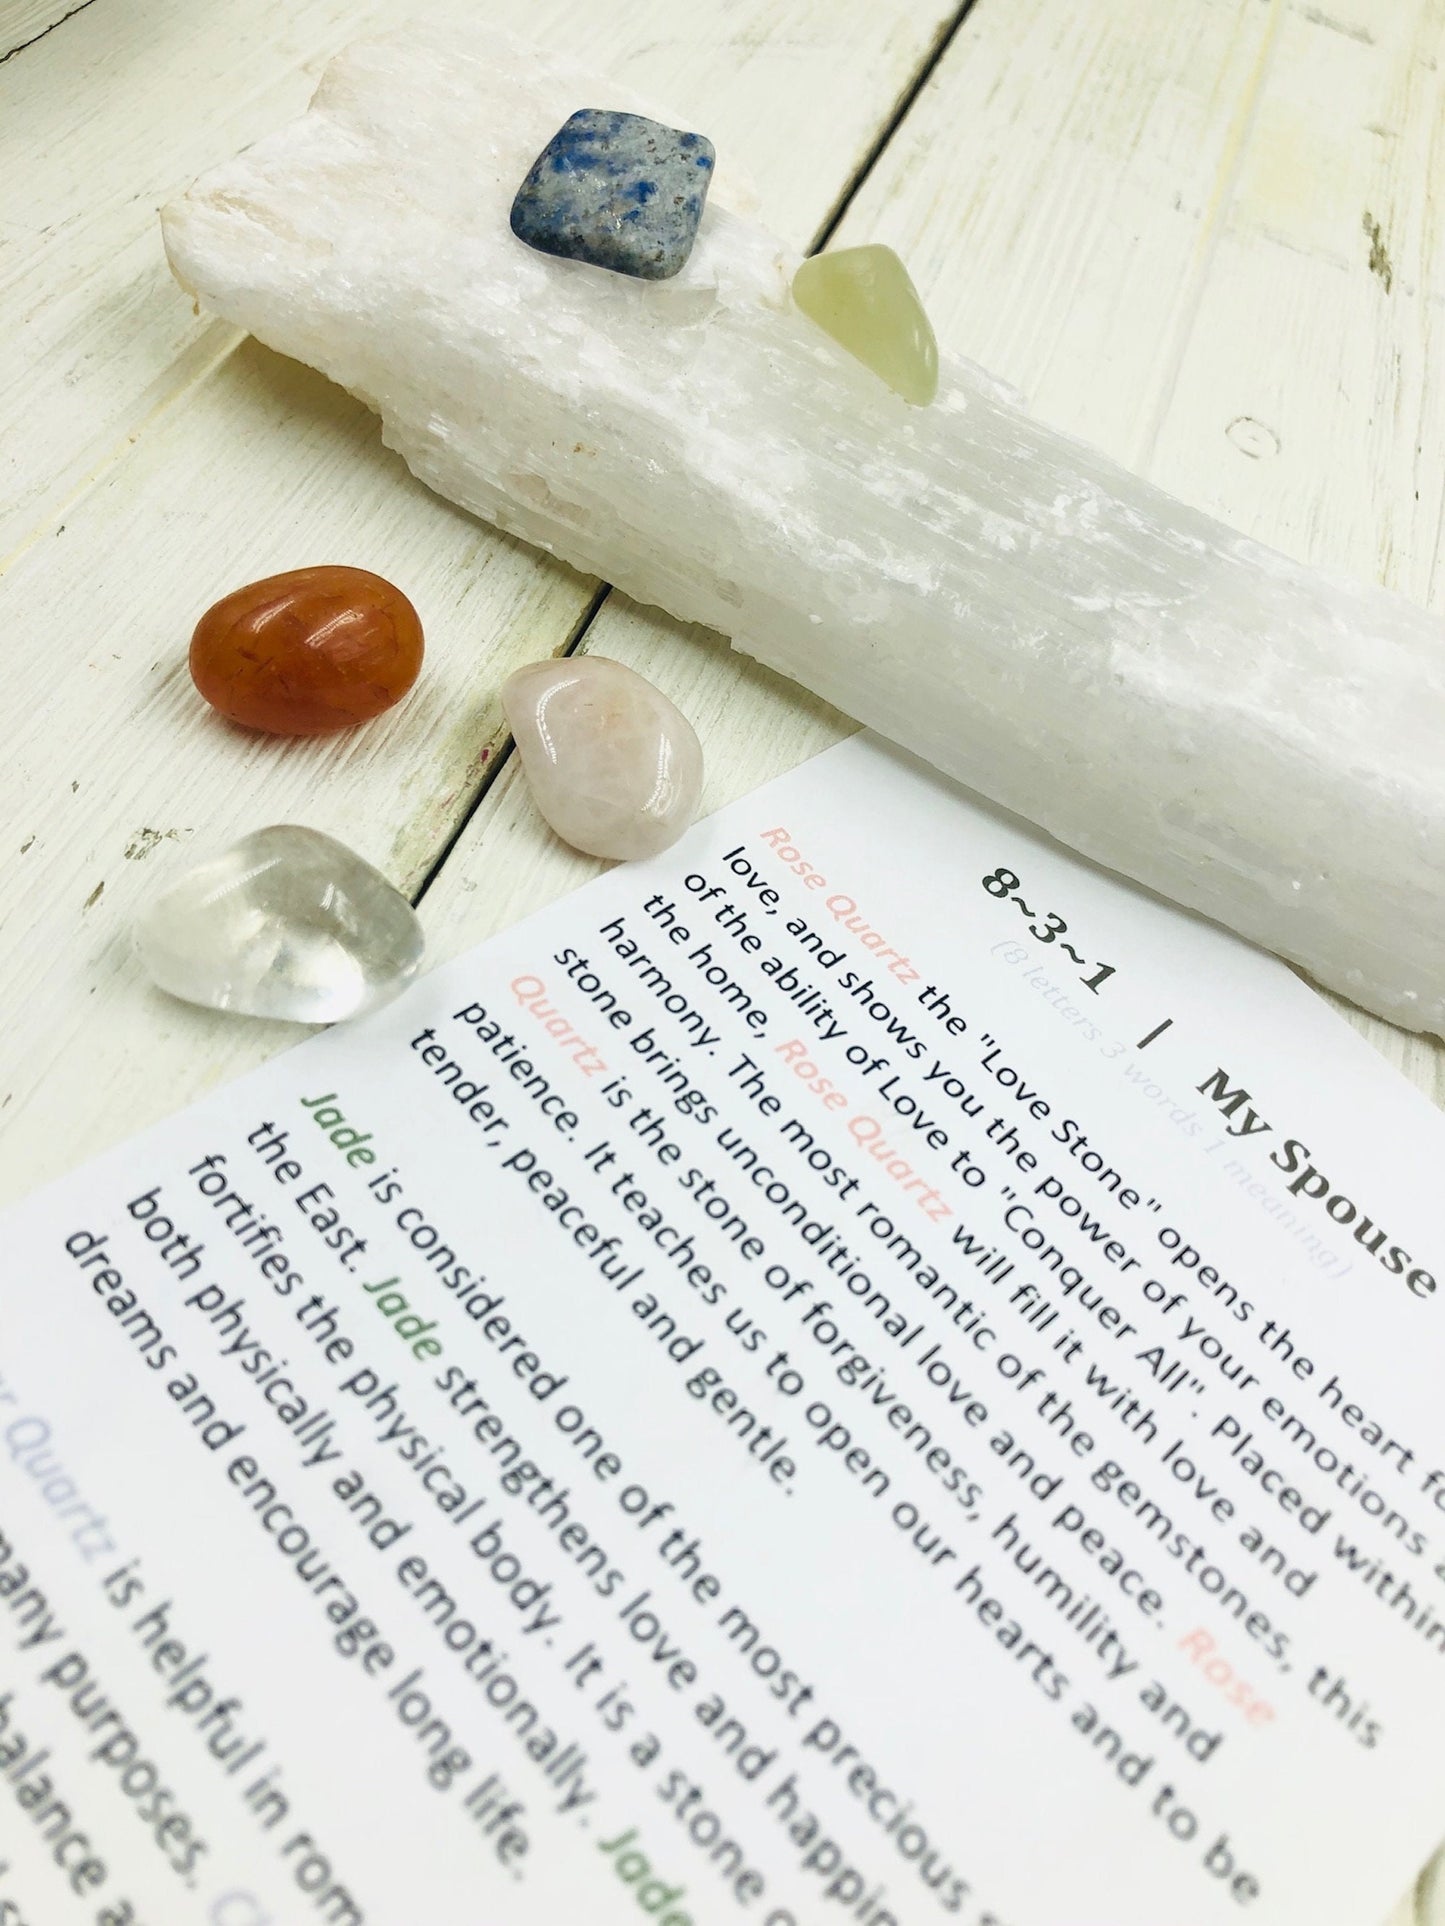 Spouse Crystal Kit - Unveiling Love and Connection